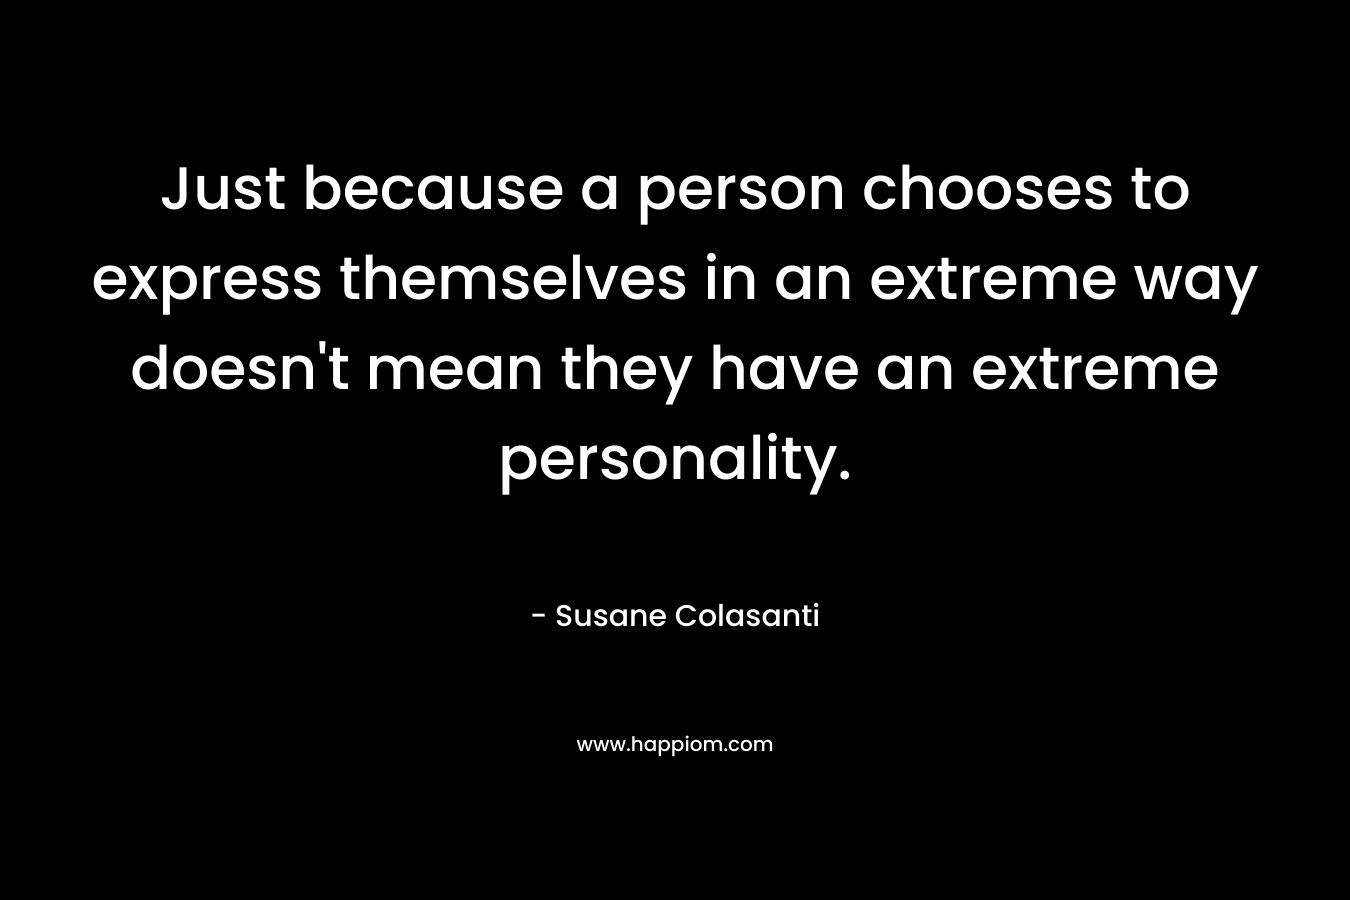 Just because a person chooses to express themselves in an extreme way doesn't mean they have an extreme personality.